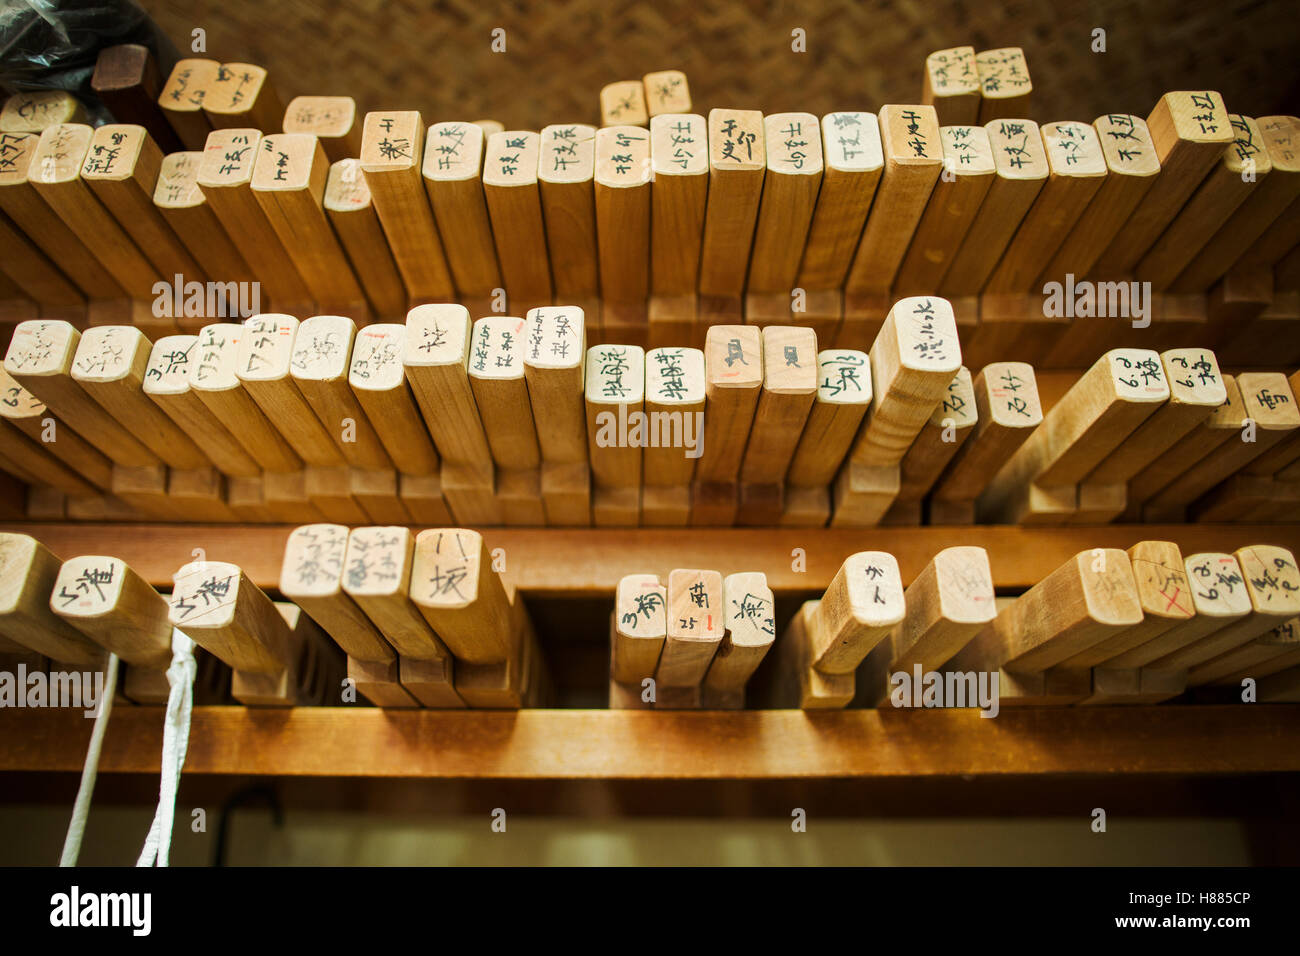 Shelves of wooden moulds for specialist treats, sweets called wagashi. Stock Photo